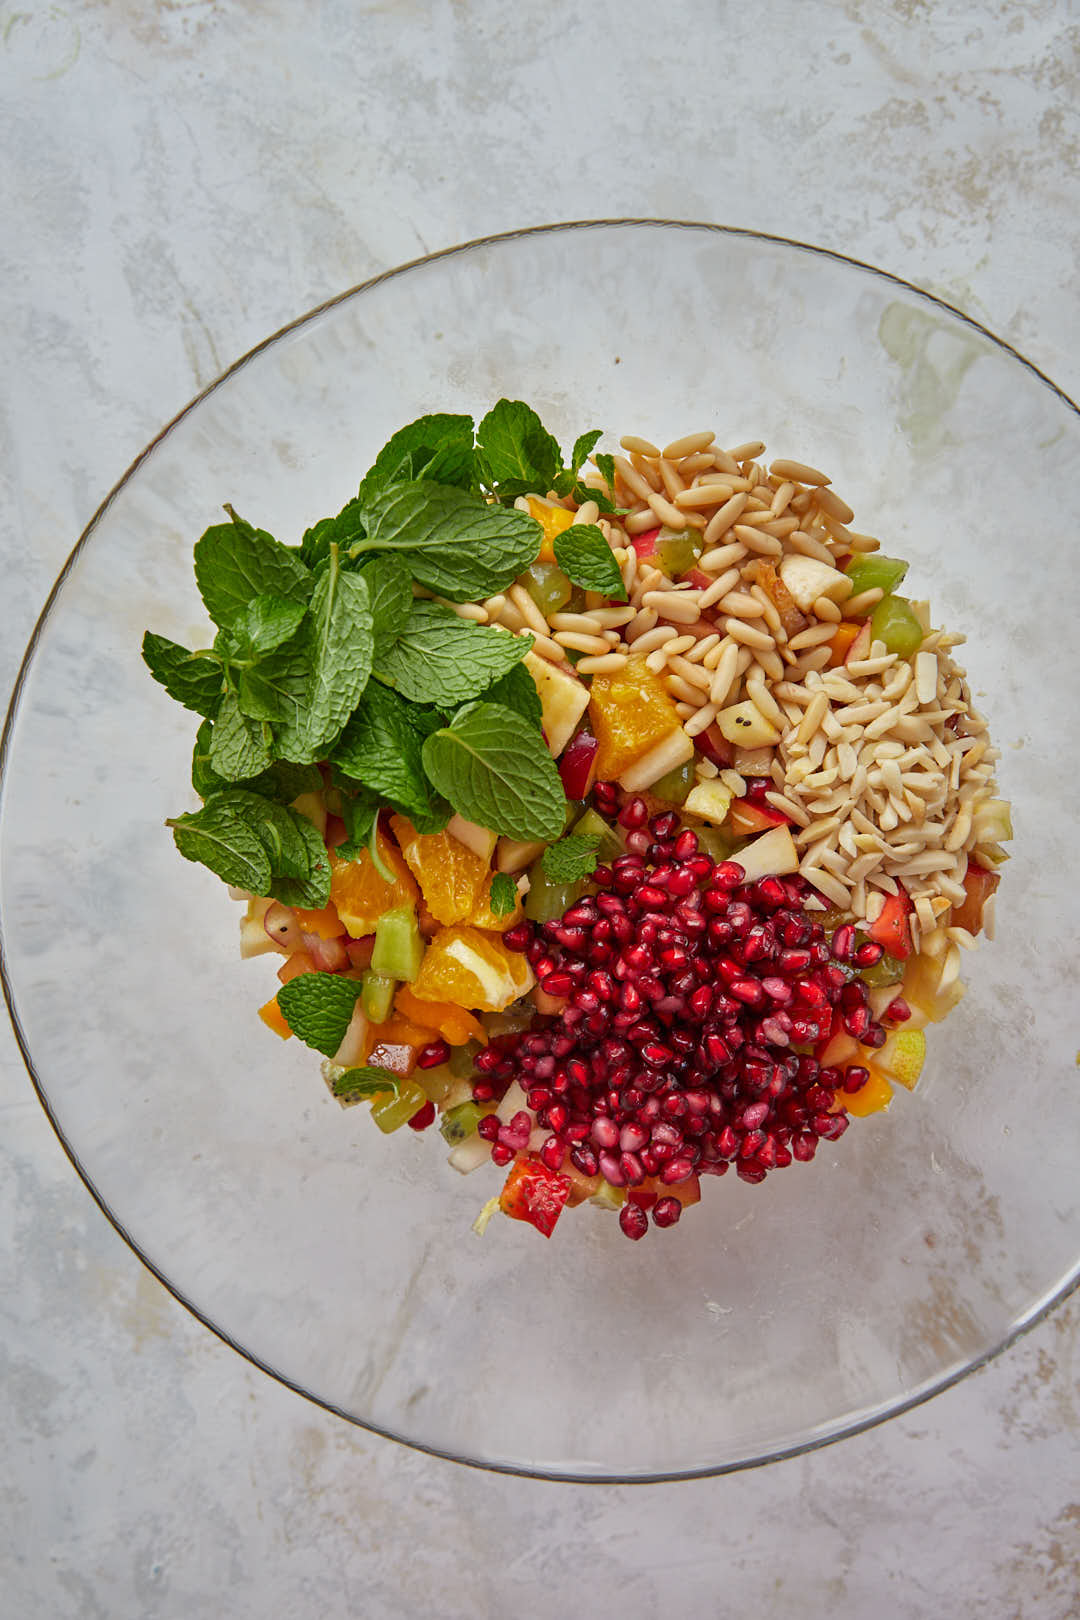 pomegranate seeds, nuts, and mint leaves on top of the fruit salad in a bowl.